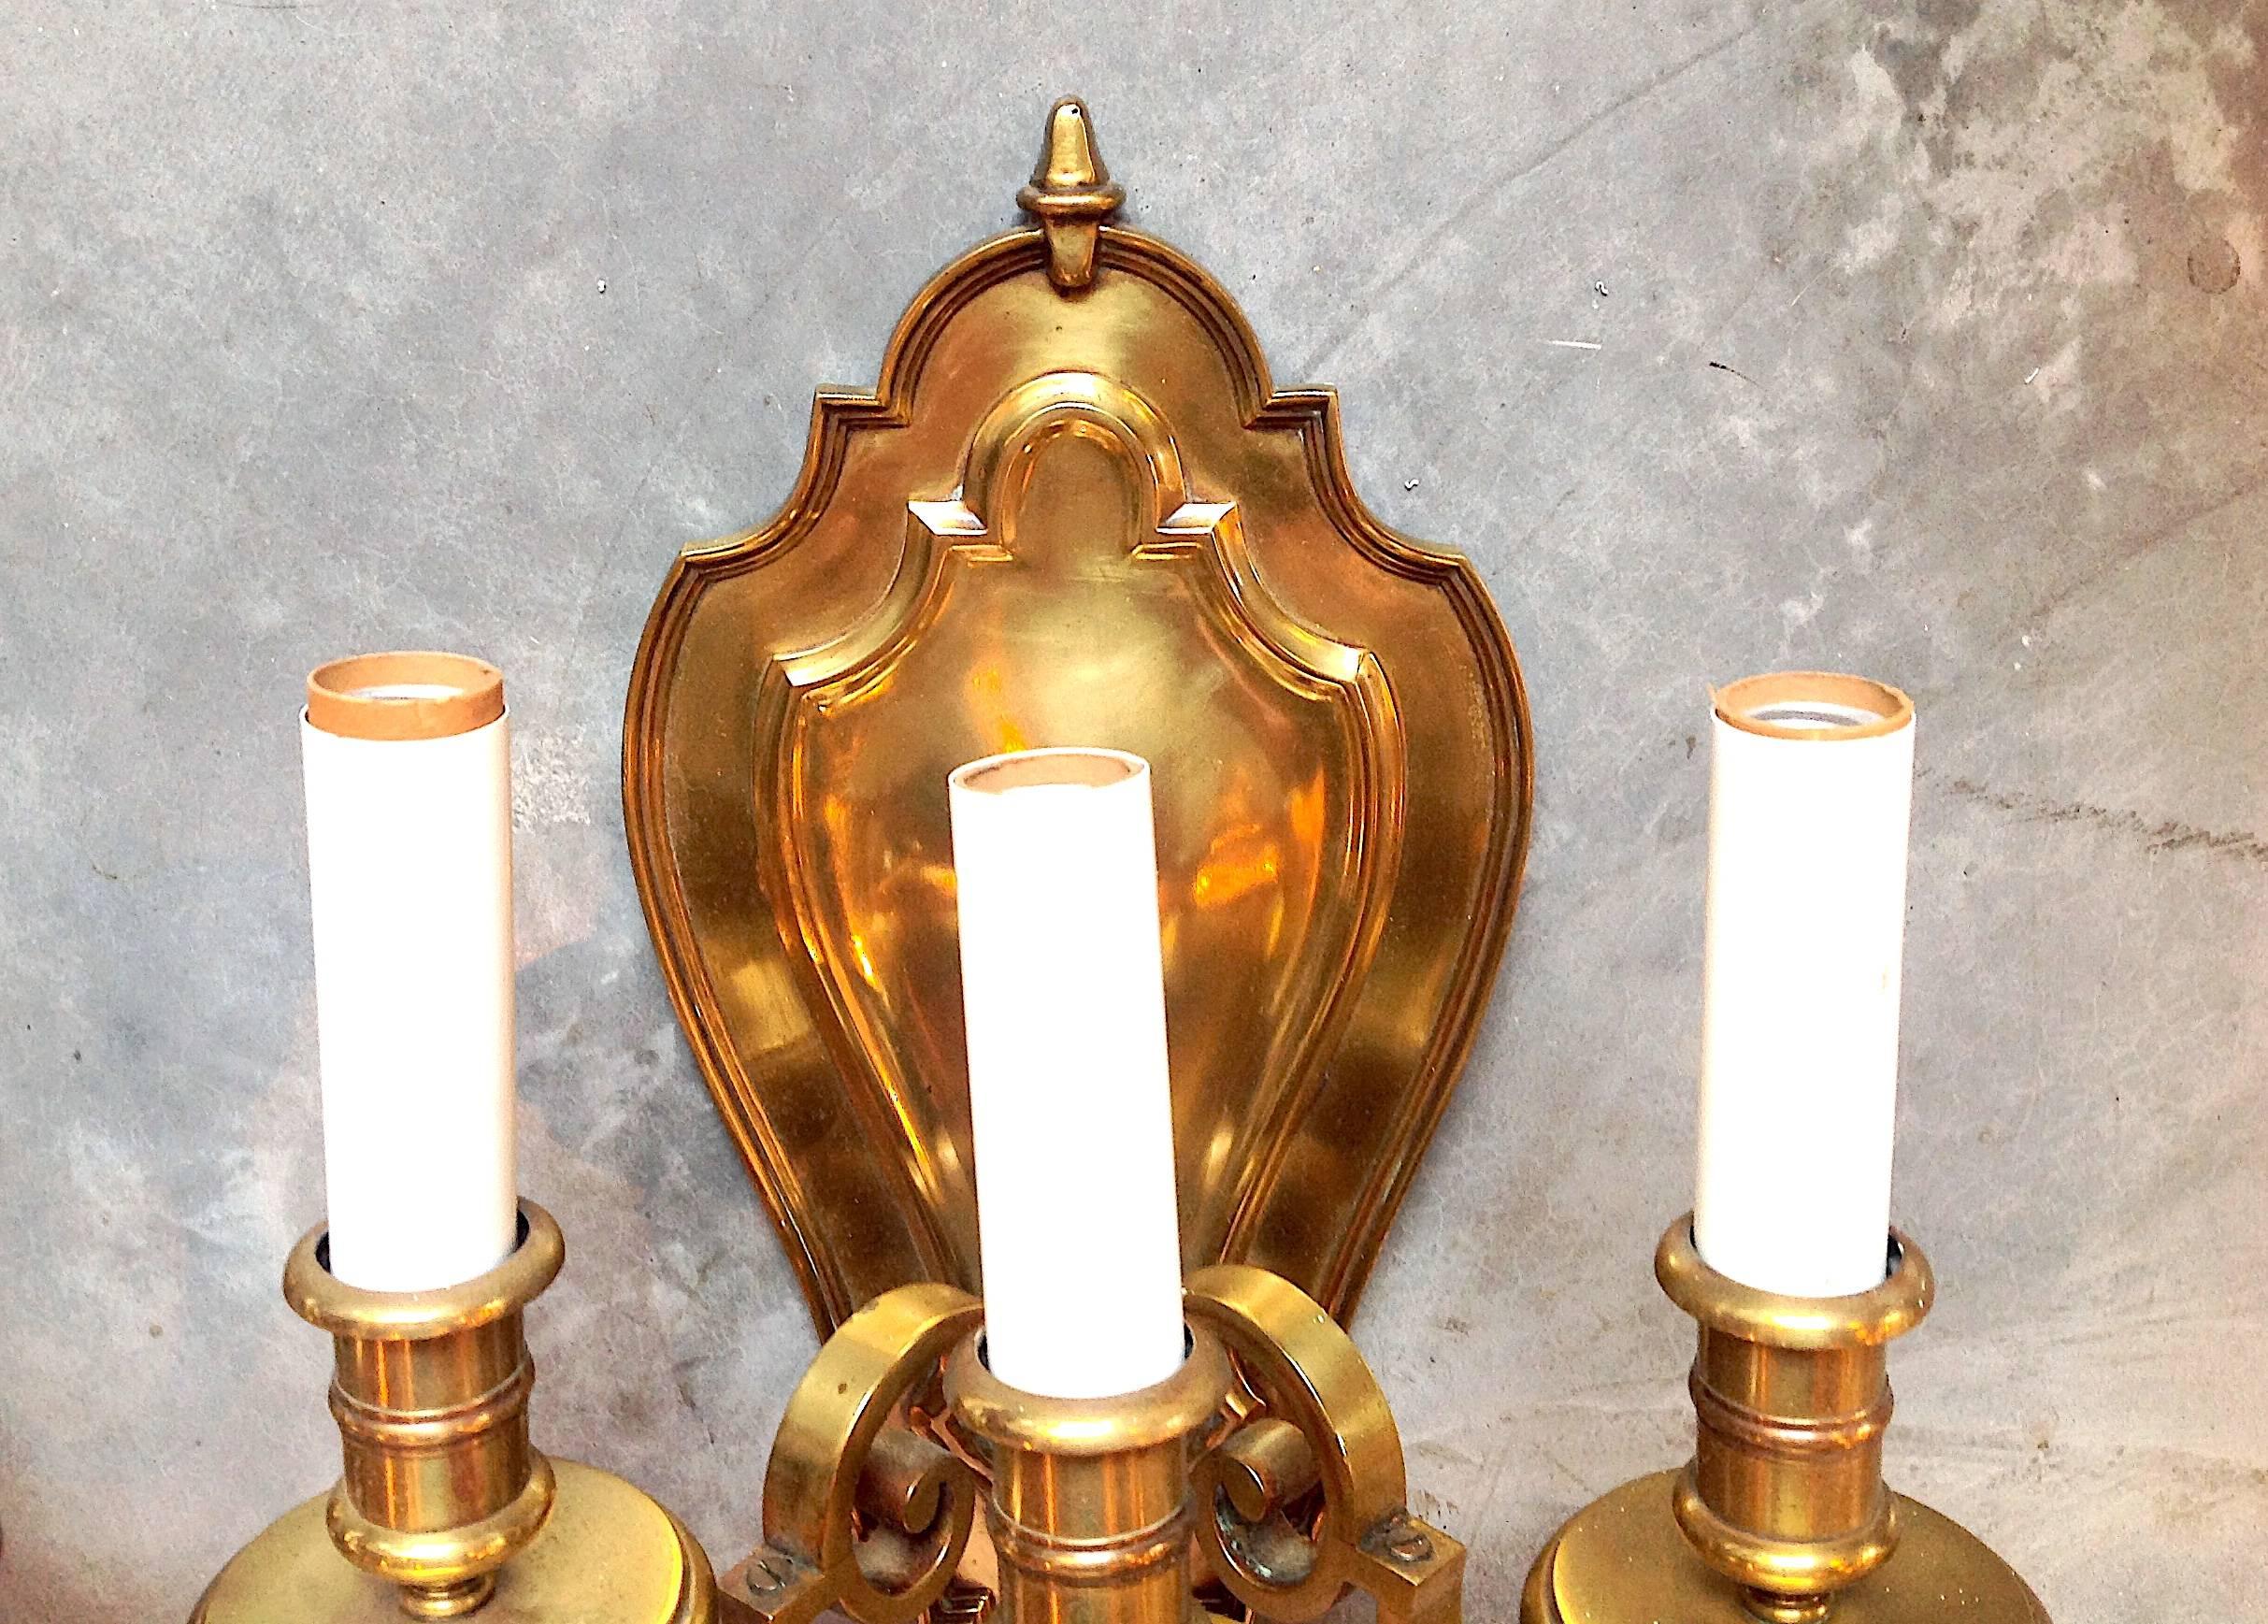 Pair of three-light English cast brass wall sconces with shield back, Edwardian style, circa 1920s, possibly Bradley & Hubbard or E.F. Caldwell.